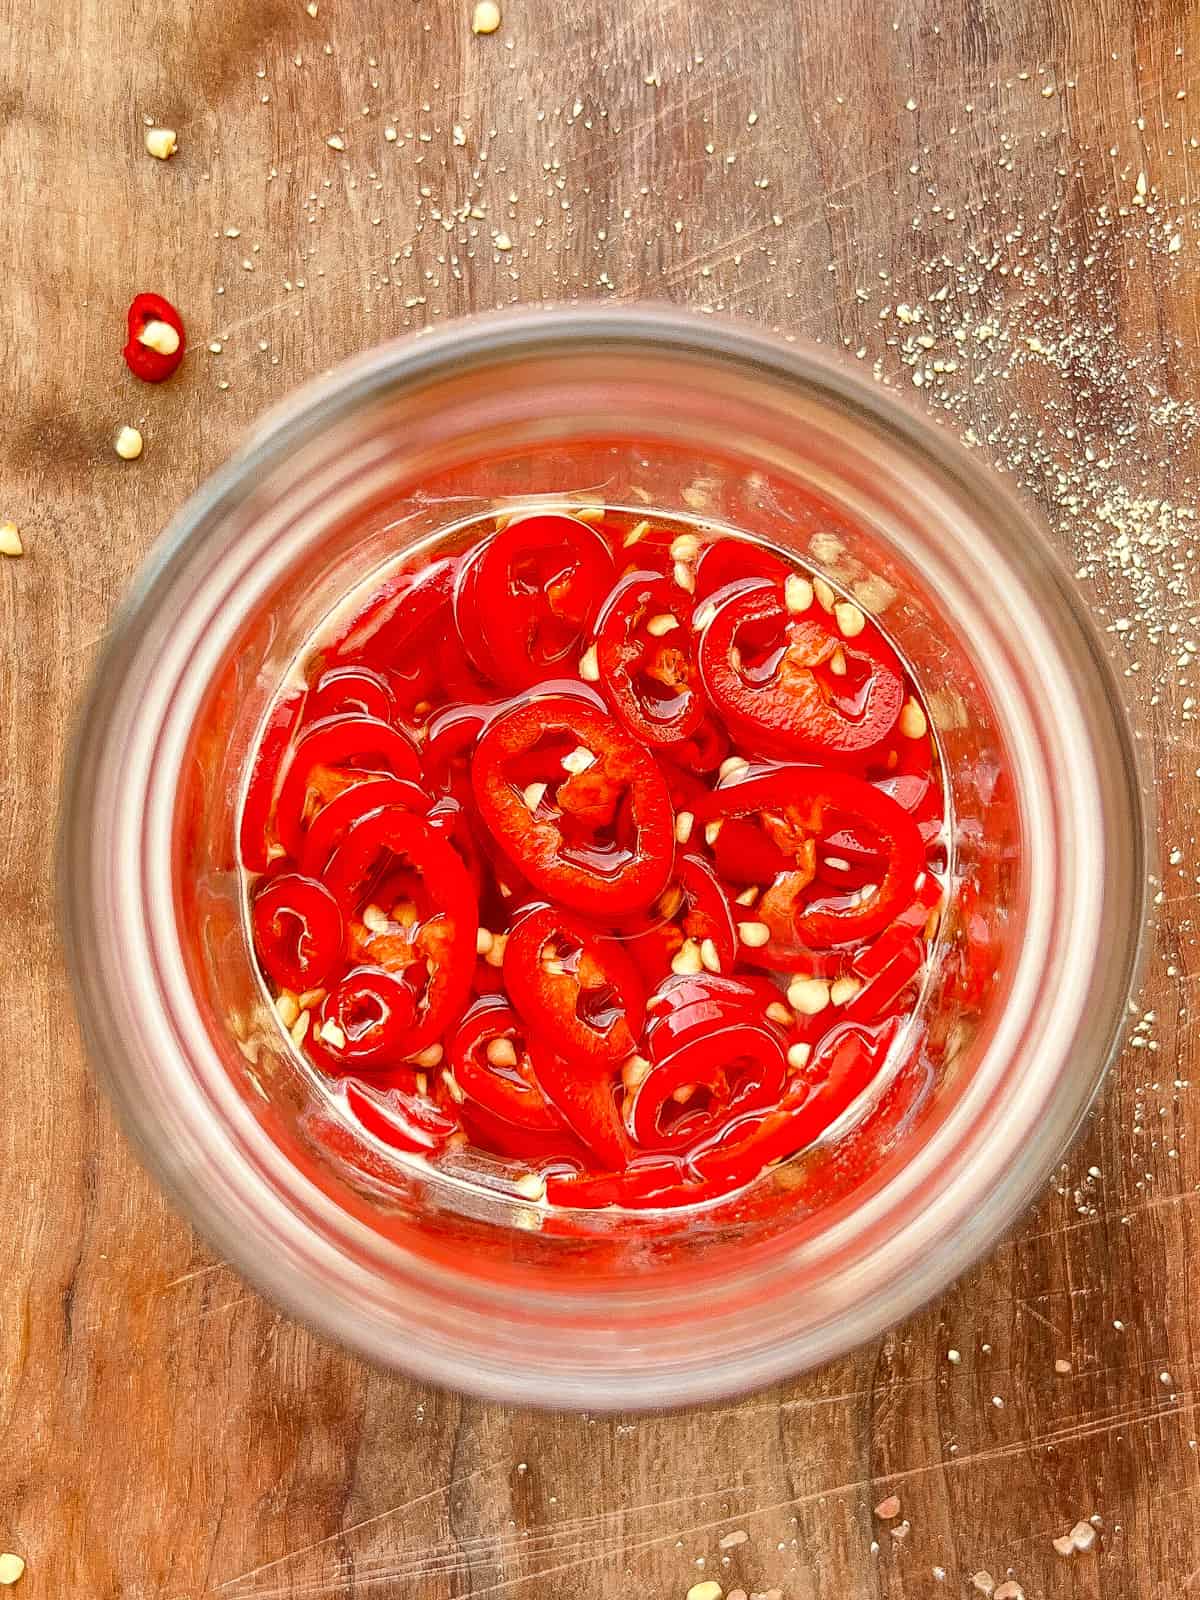 An image of a jar of pickled hot peppers.